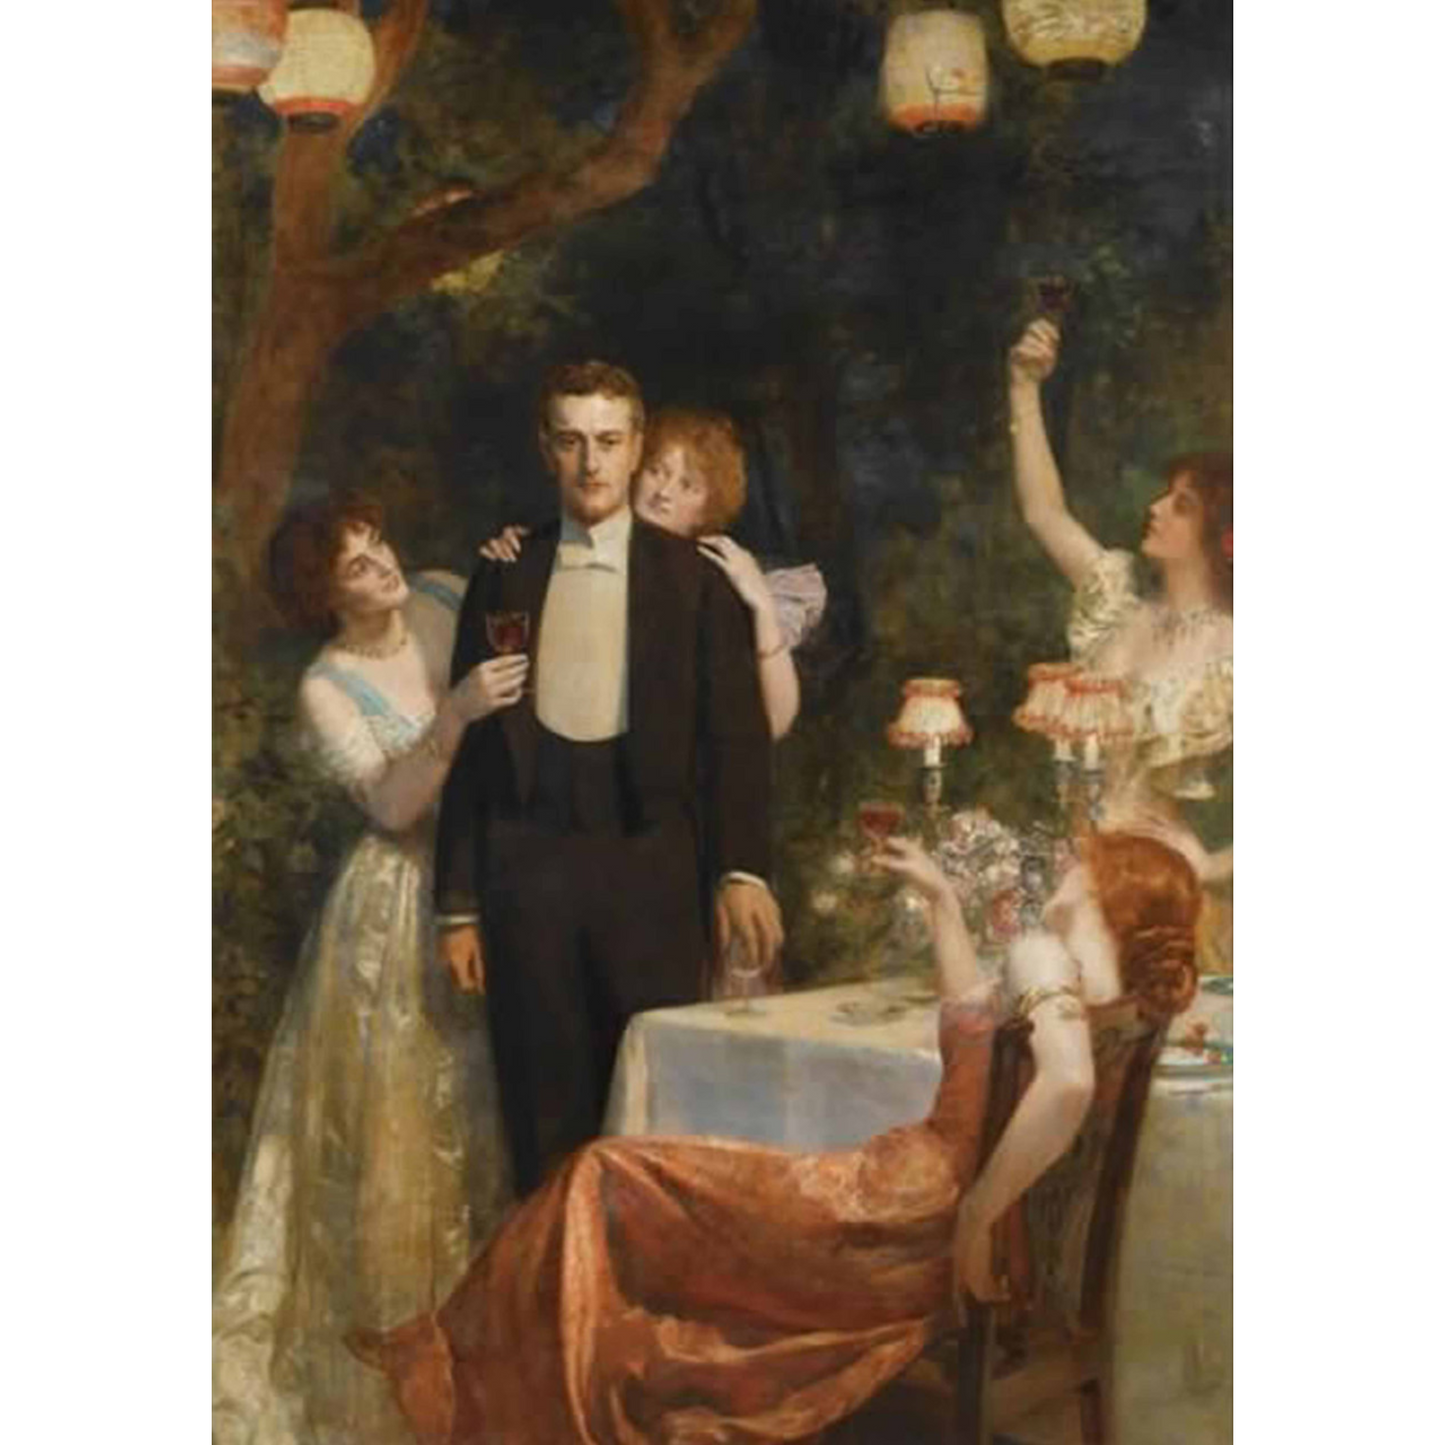 "The Party by John Collier" reproduction on decoupage rice paper by Decoupage Queen. Available at Milton's Daughter.